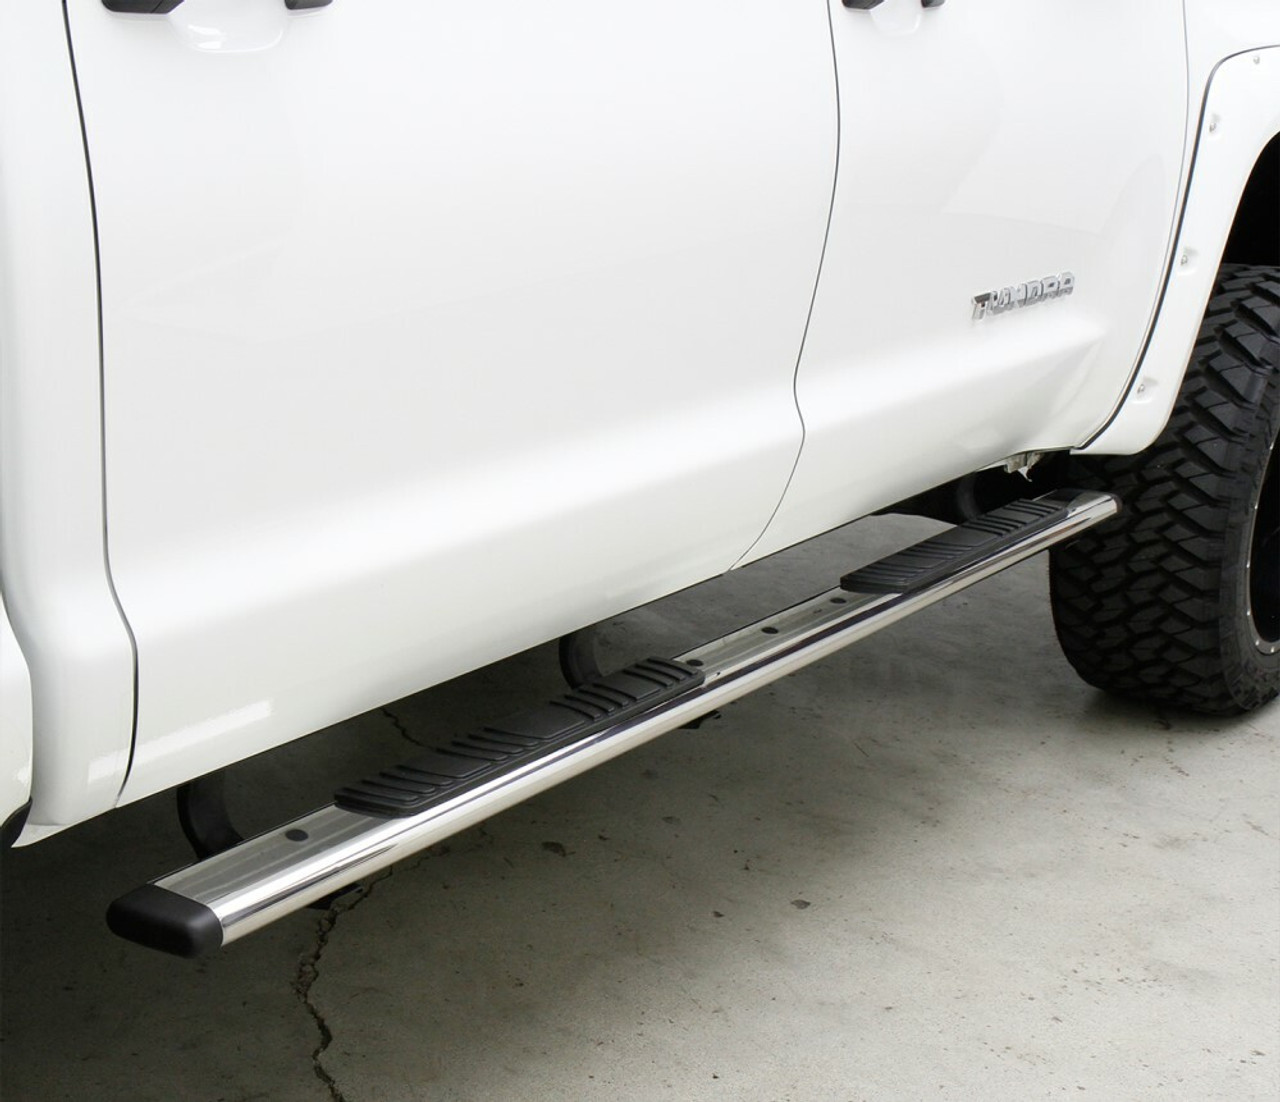 Go Rhino 685404552T Chevrolet, Silverado 2500HD, 3500HD, 2011-2019, 5 inch OE Xtreme Low Profile - Complete Kit: Galvanized Steel, Textured black, 650052T side bars + 6840455 OE Xtreme Brackets. 5 inch x 52 inch bars. Gasoline only